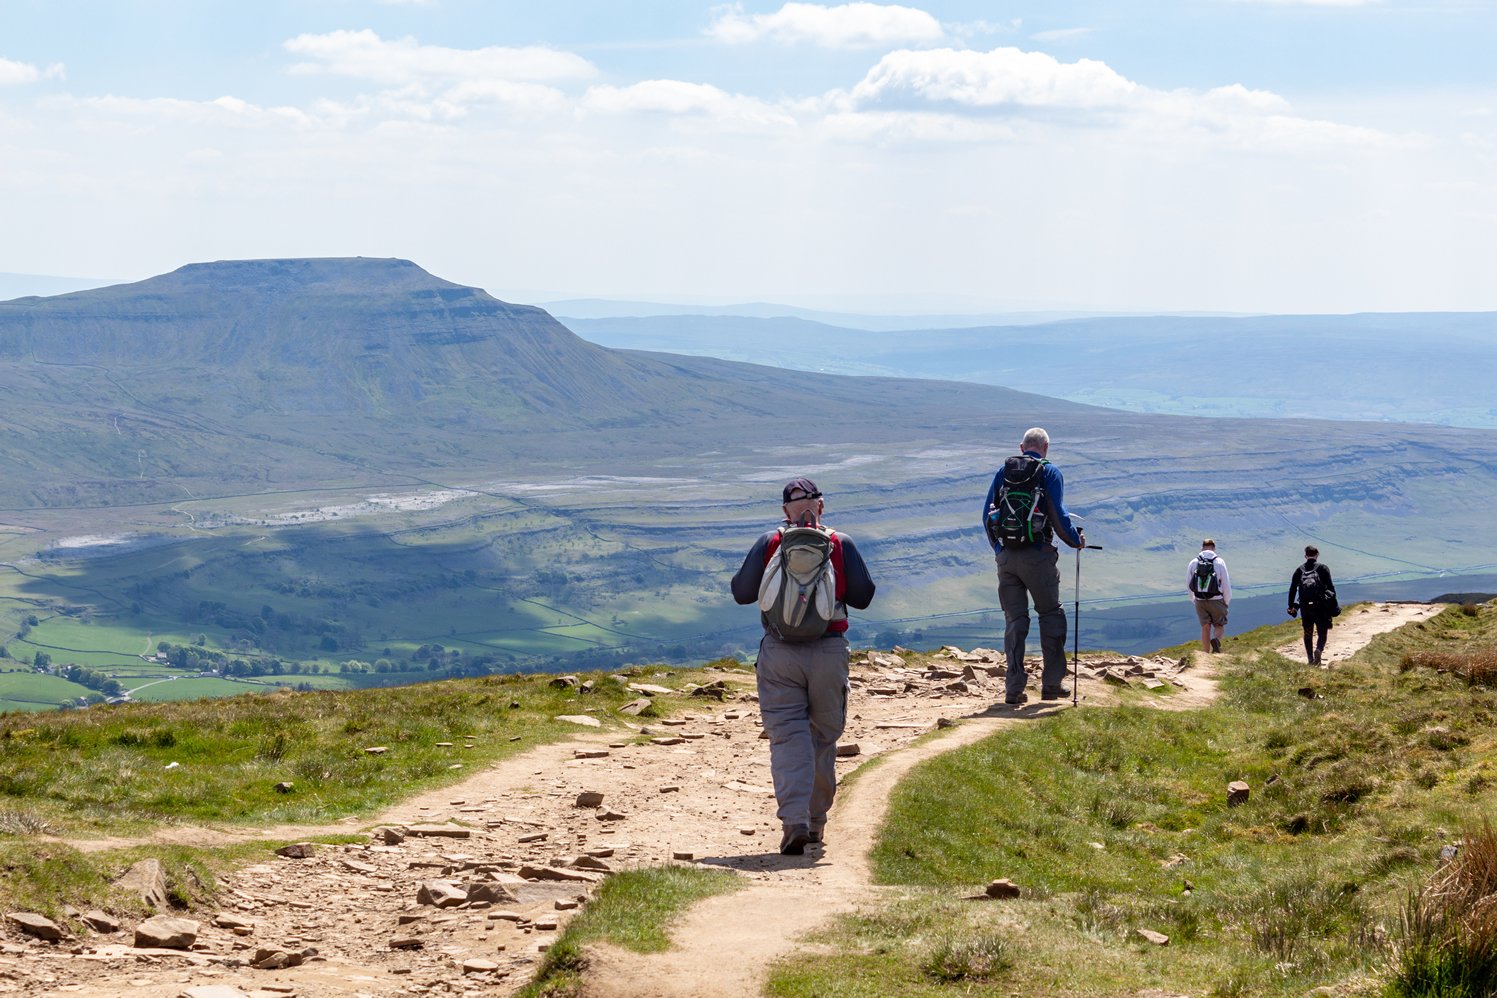 Image name walkers descending whernside view of ingleborough sunny yorkshire the 17 image from the post Stride Out in Yorkshire: Celebrate National Walking Day in Yorkshire.com.